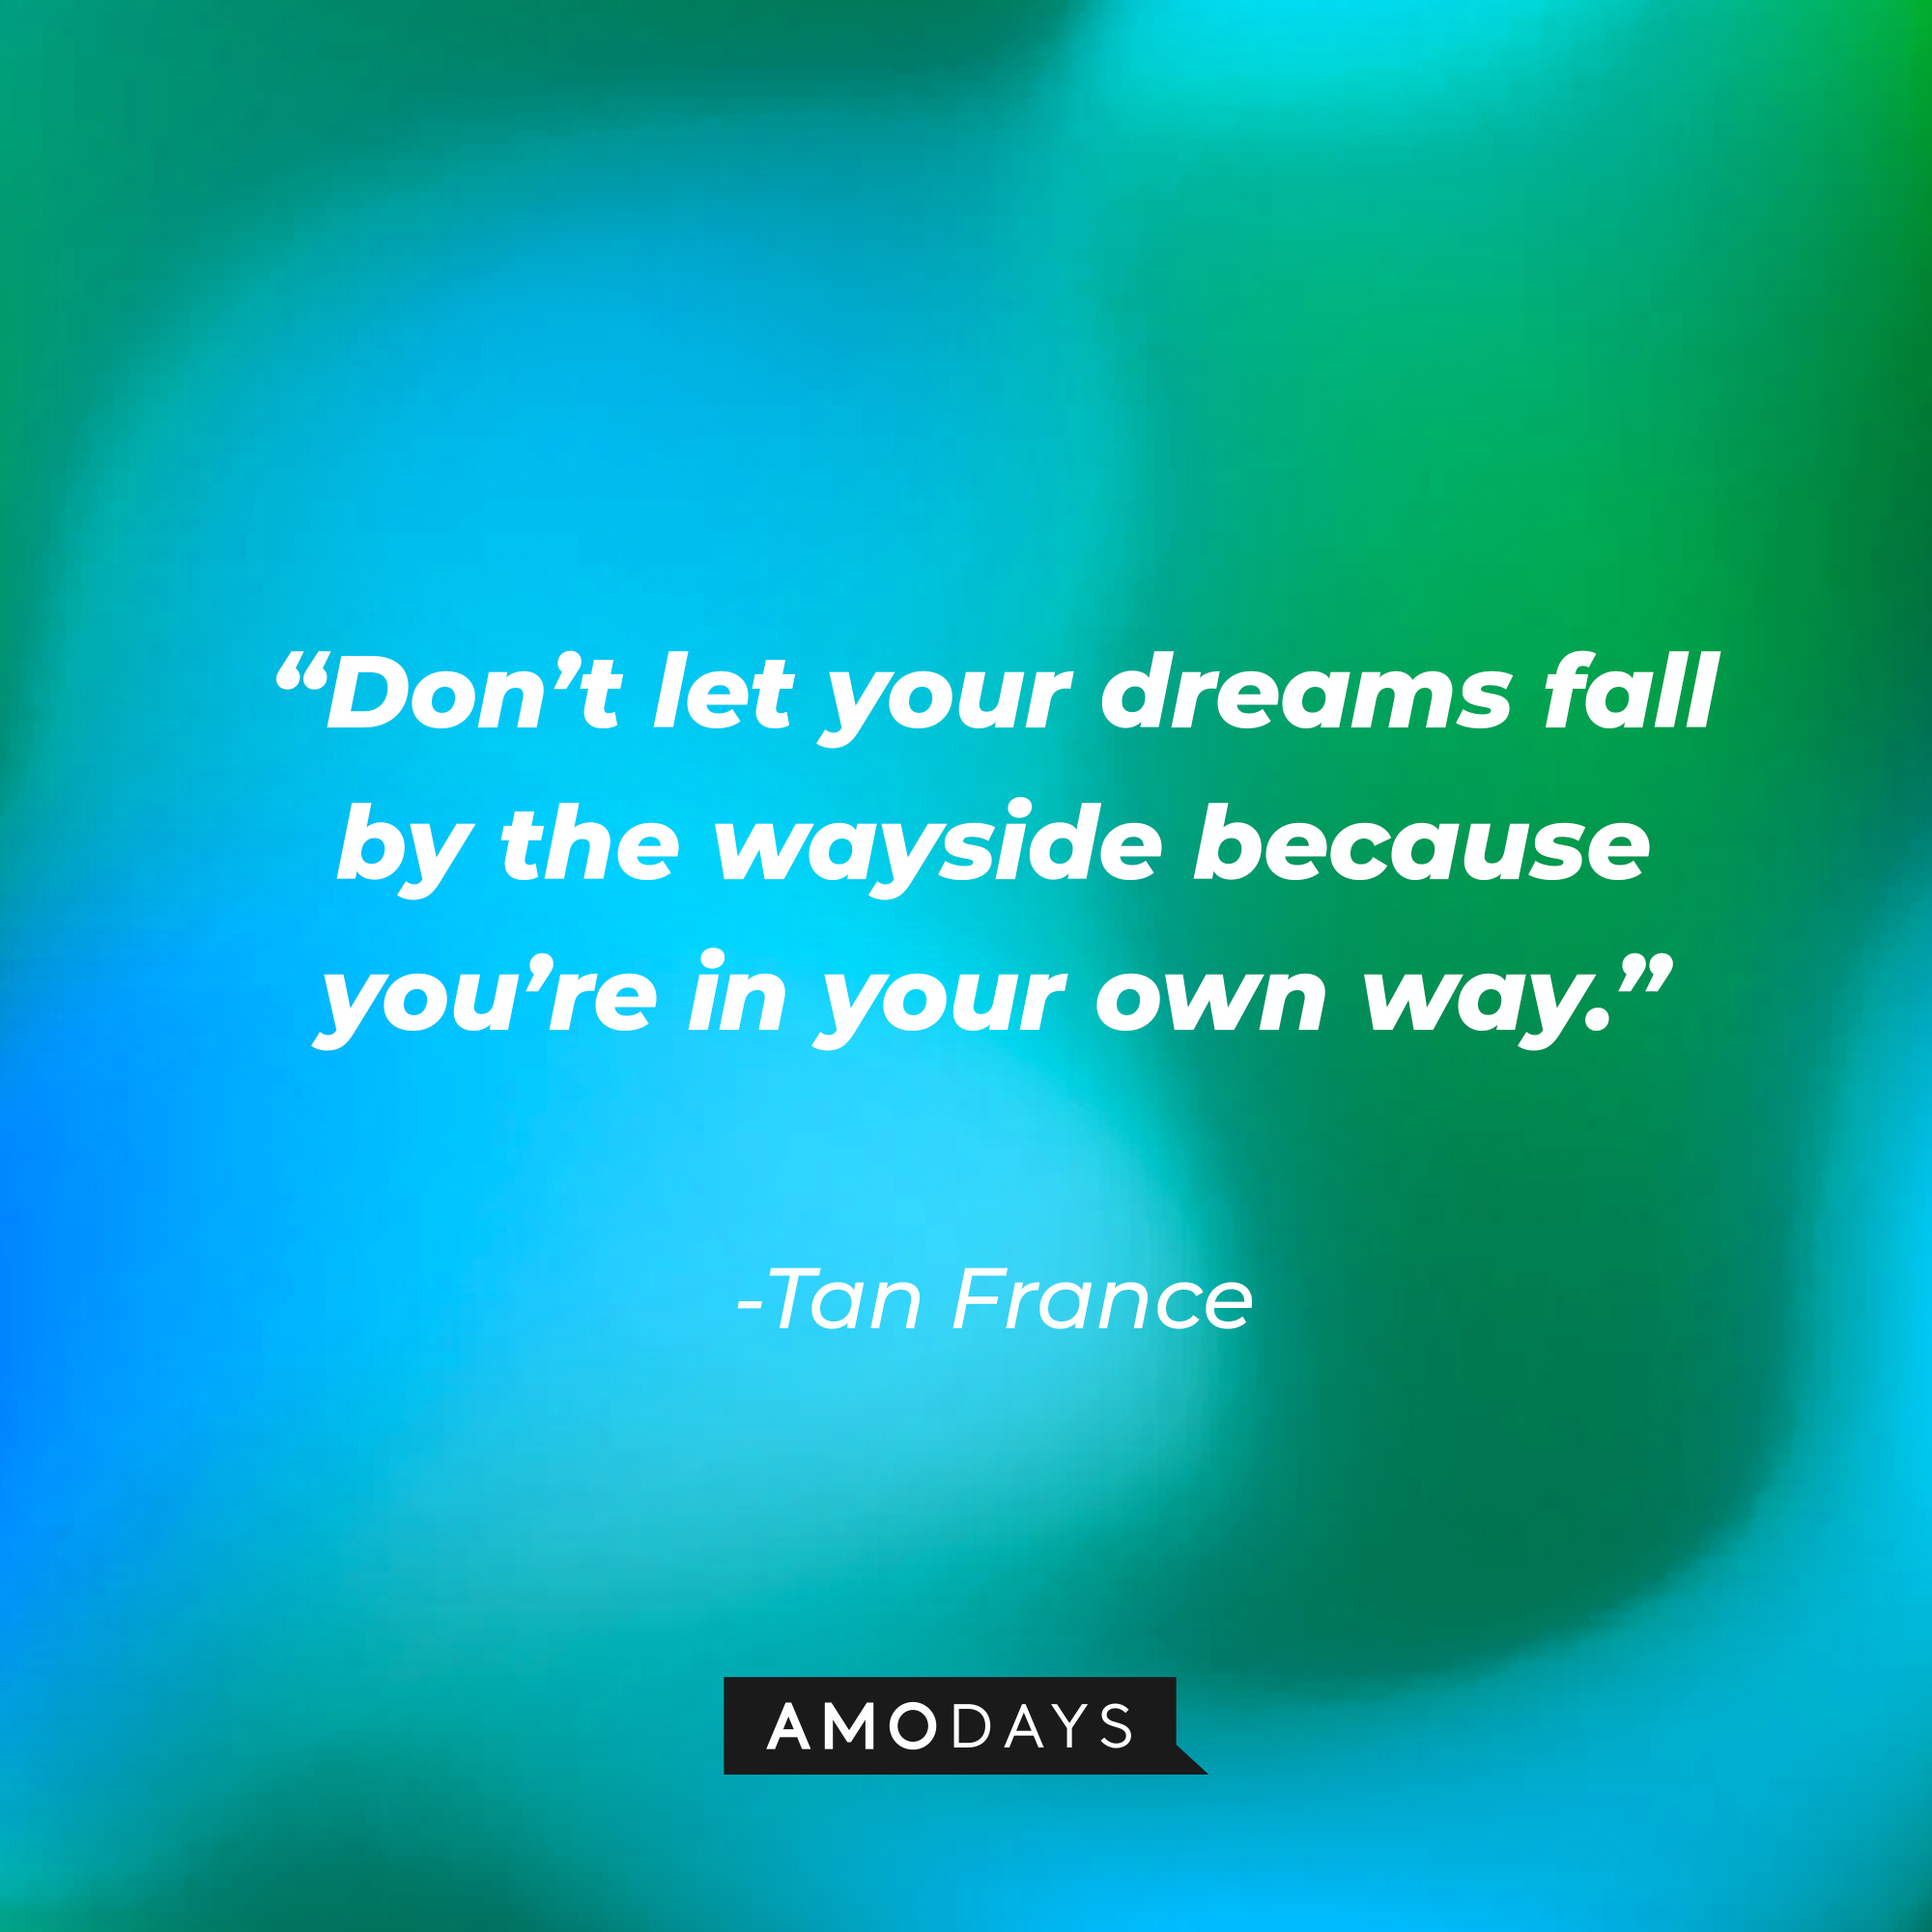 Tan France's quote: "Don't let your dreams fall by the wayside because you're in your own way." | Source: Getty Images